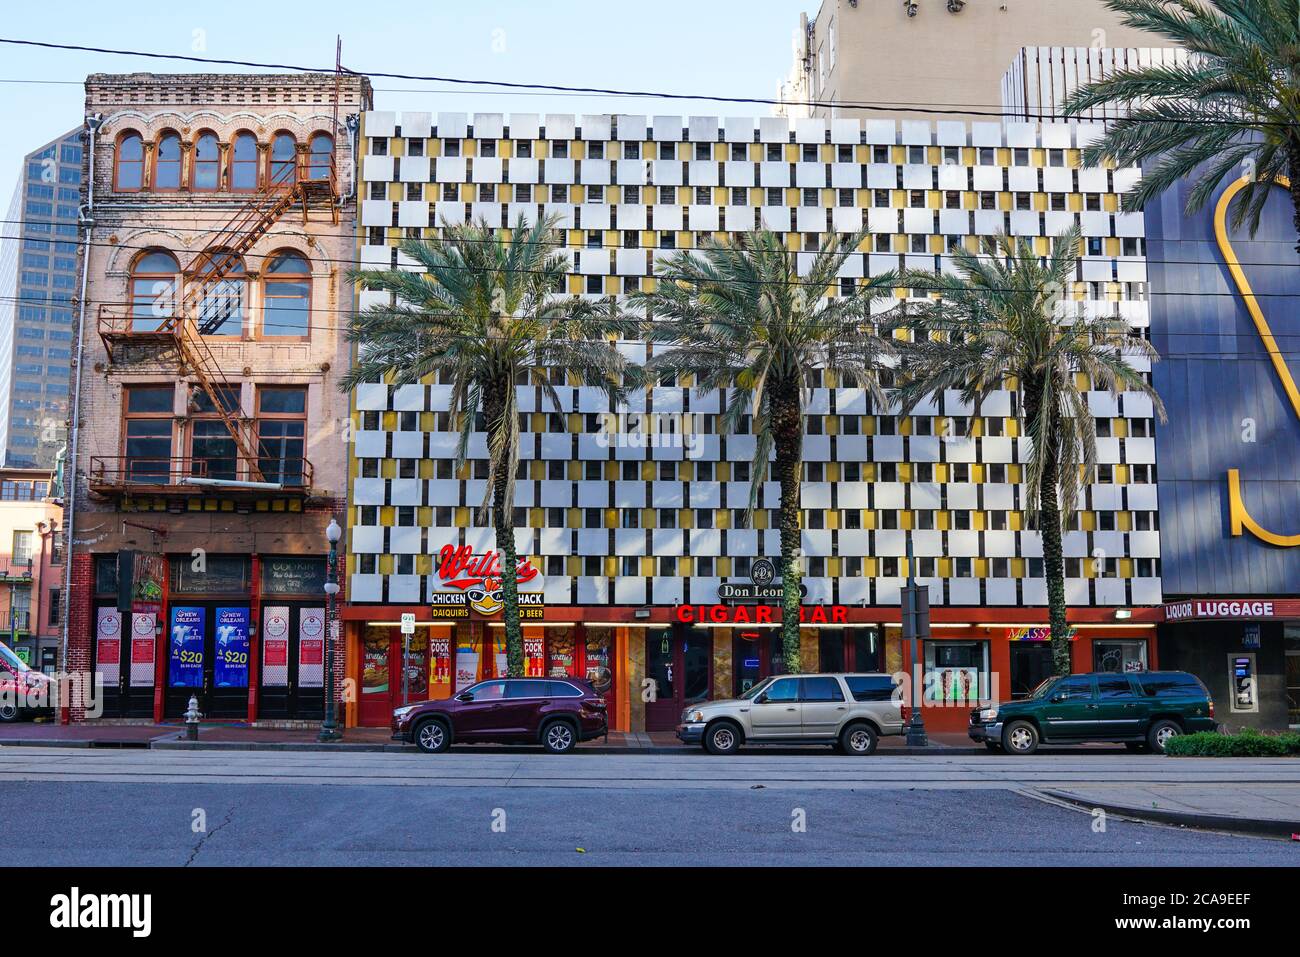 New Orleans - 04/15/2018 : Palms and buildings with different styles and eras Stock Photo